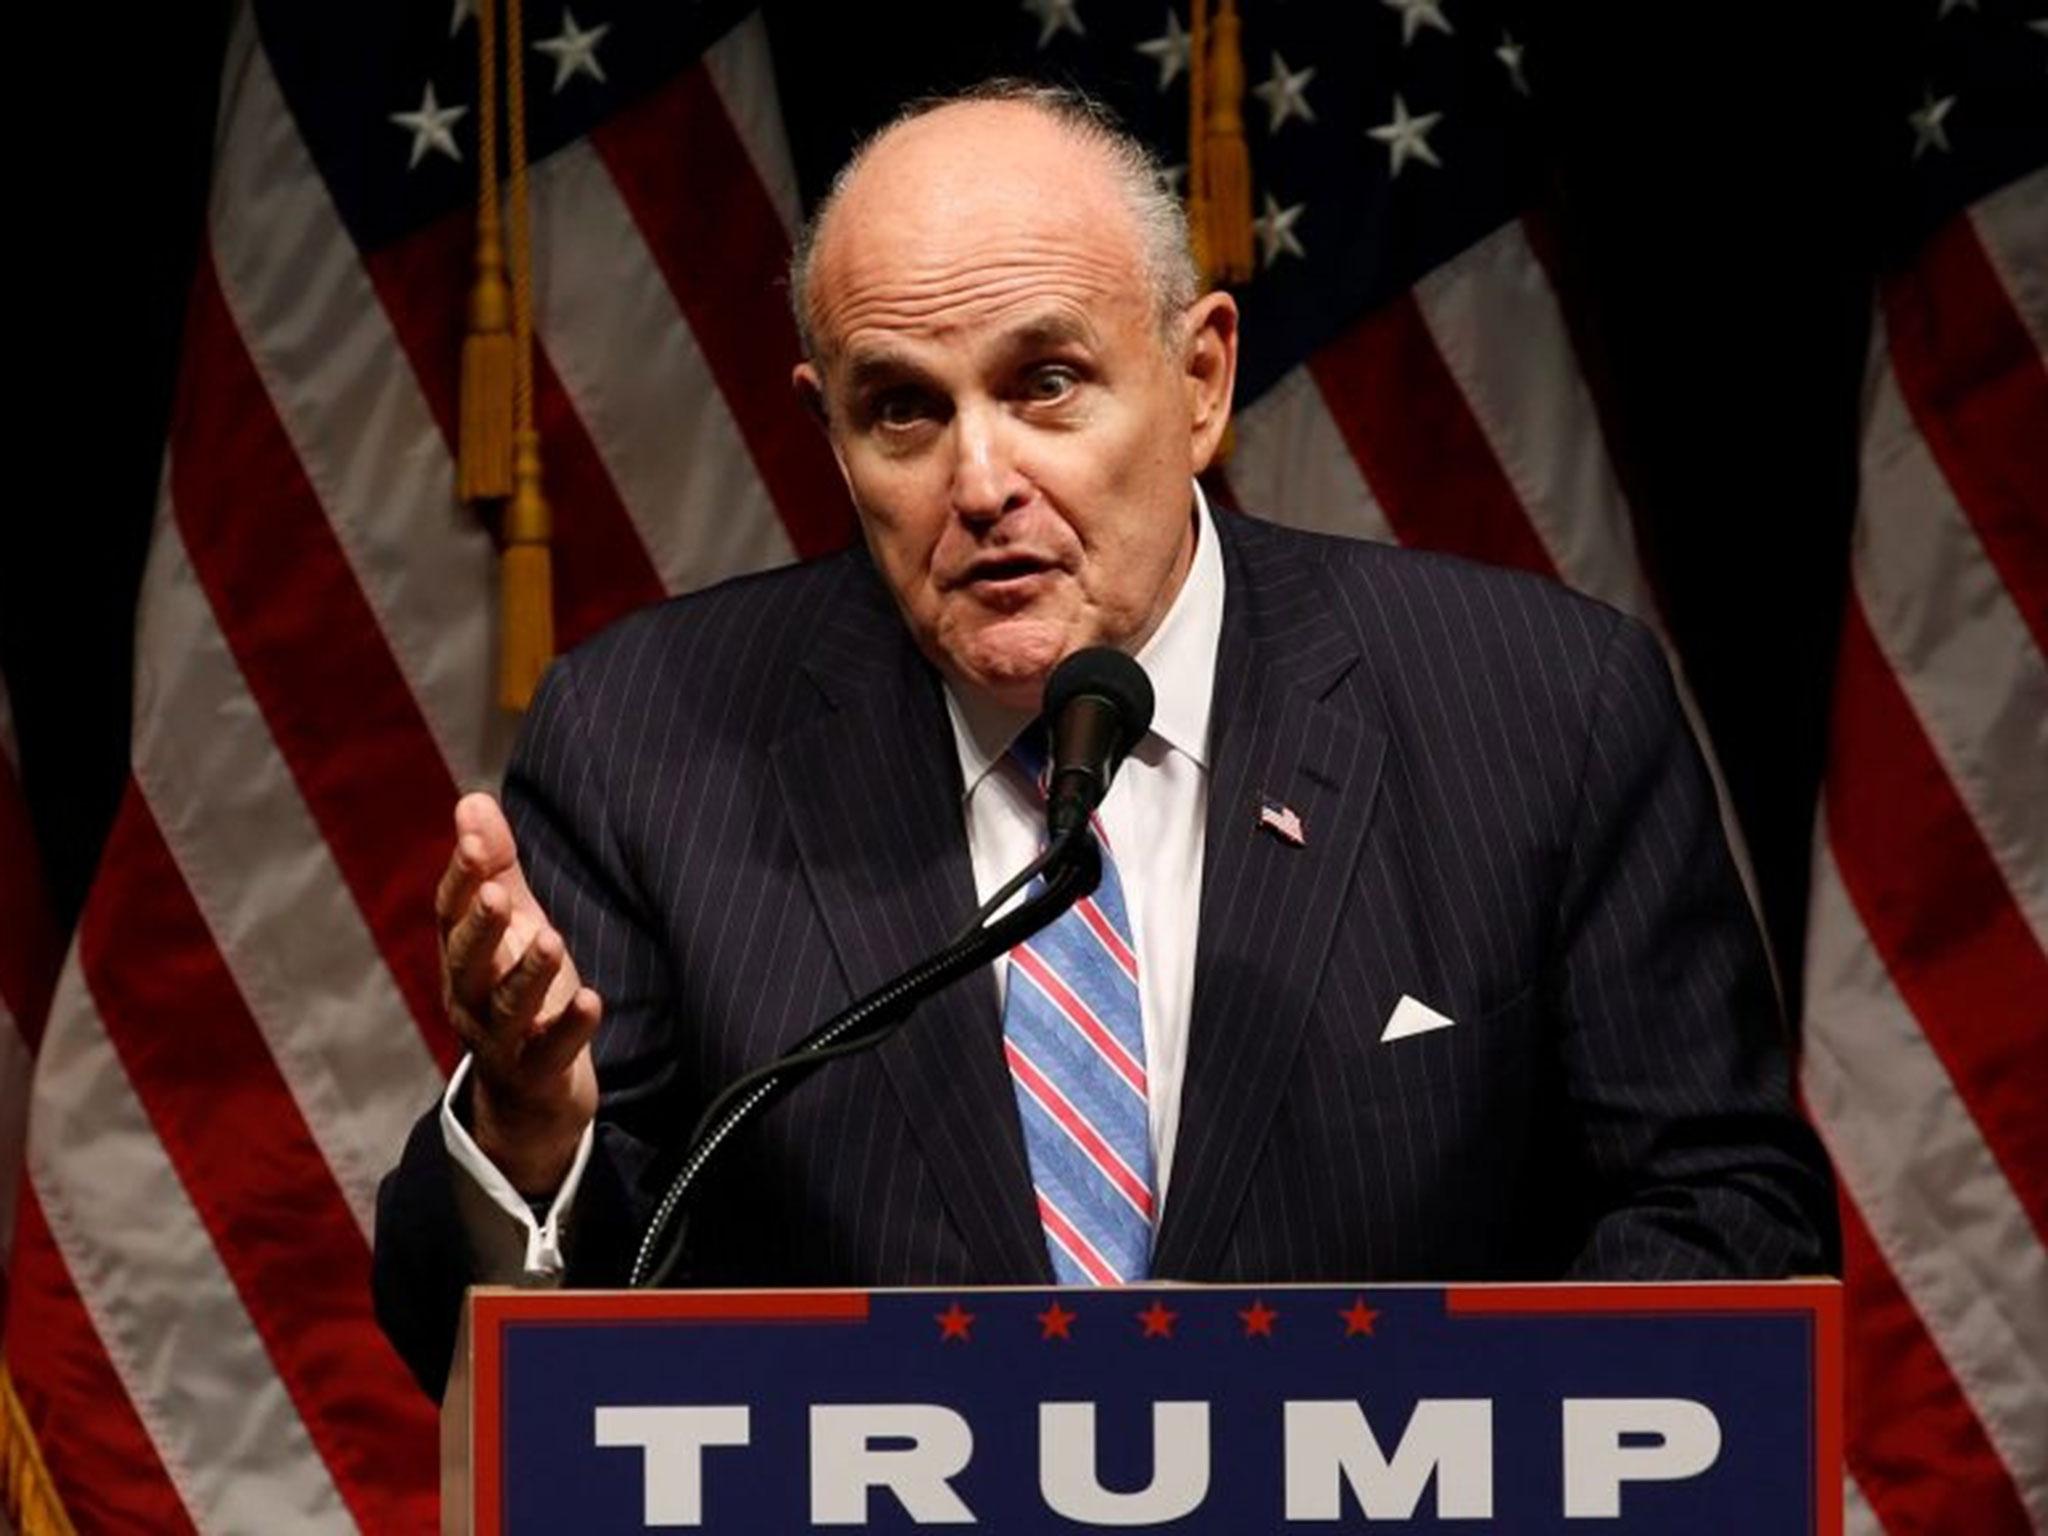 Former New York Mayor Rudy Giuliani speaking at a Donald Trump rally in Iowa in September